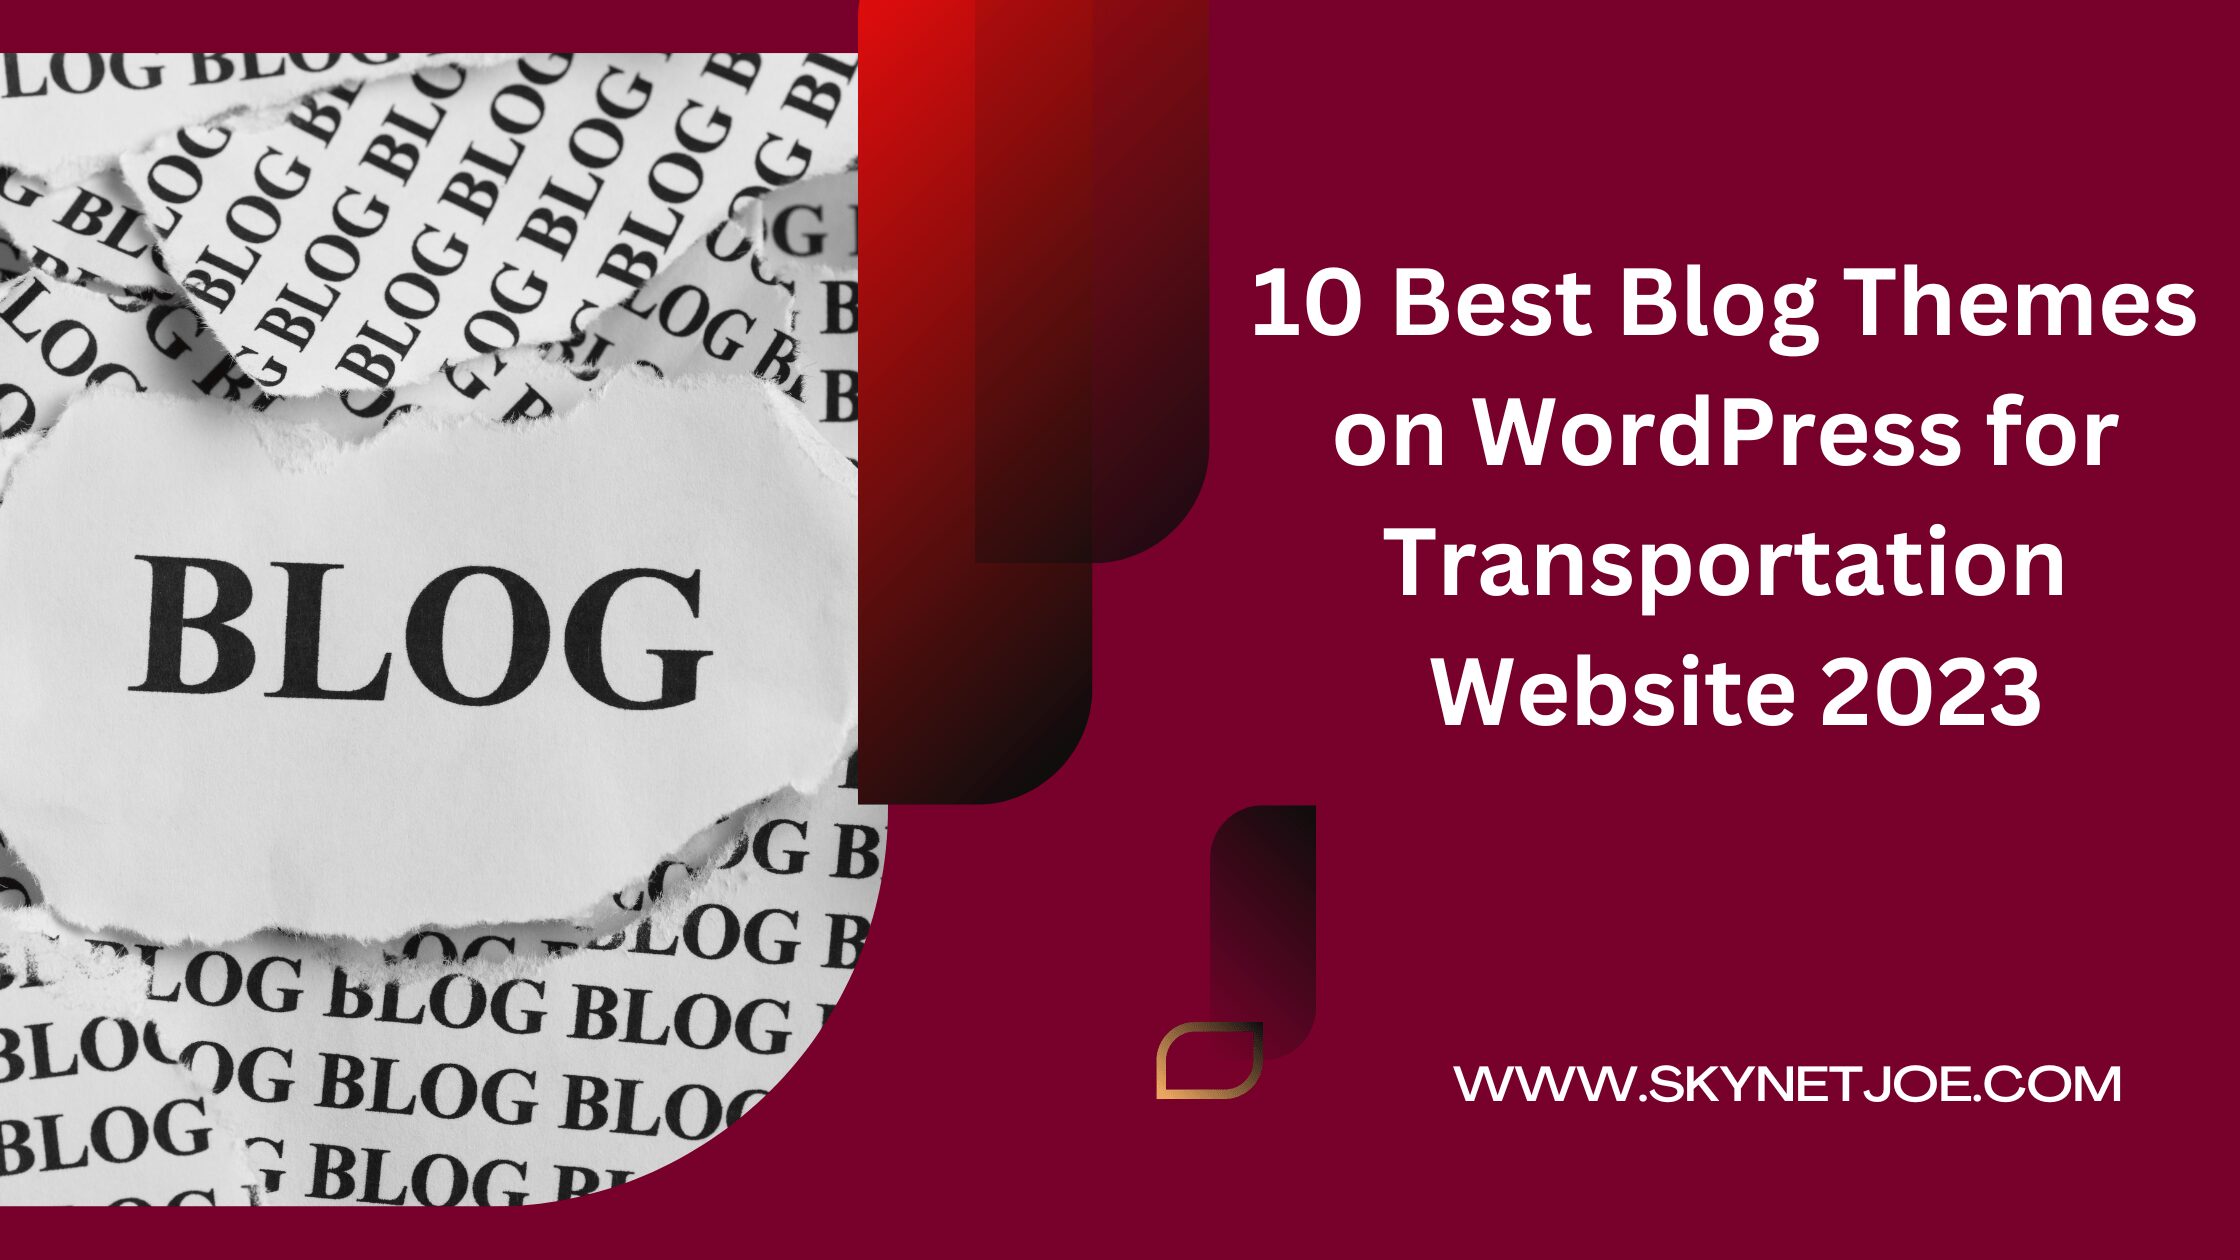 Best Blog Themes on WordPress for Transportation Websites, WordPress transportation theme, customizable blog themes, professional-looking website, SEO-friendly theme